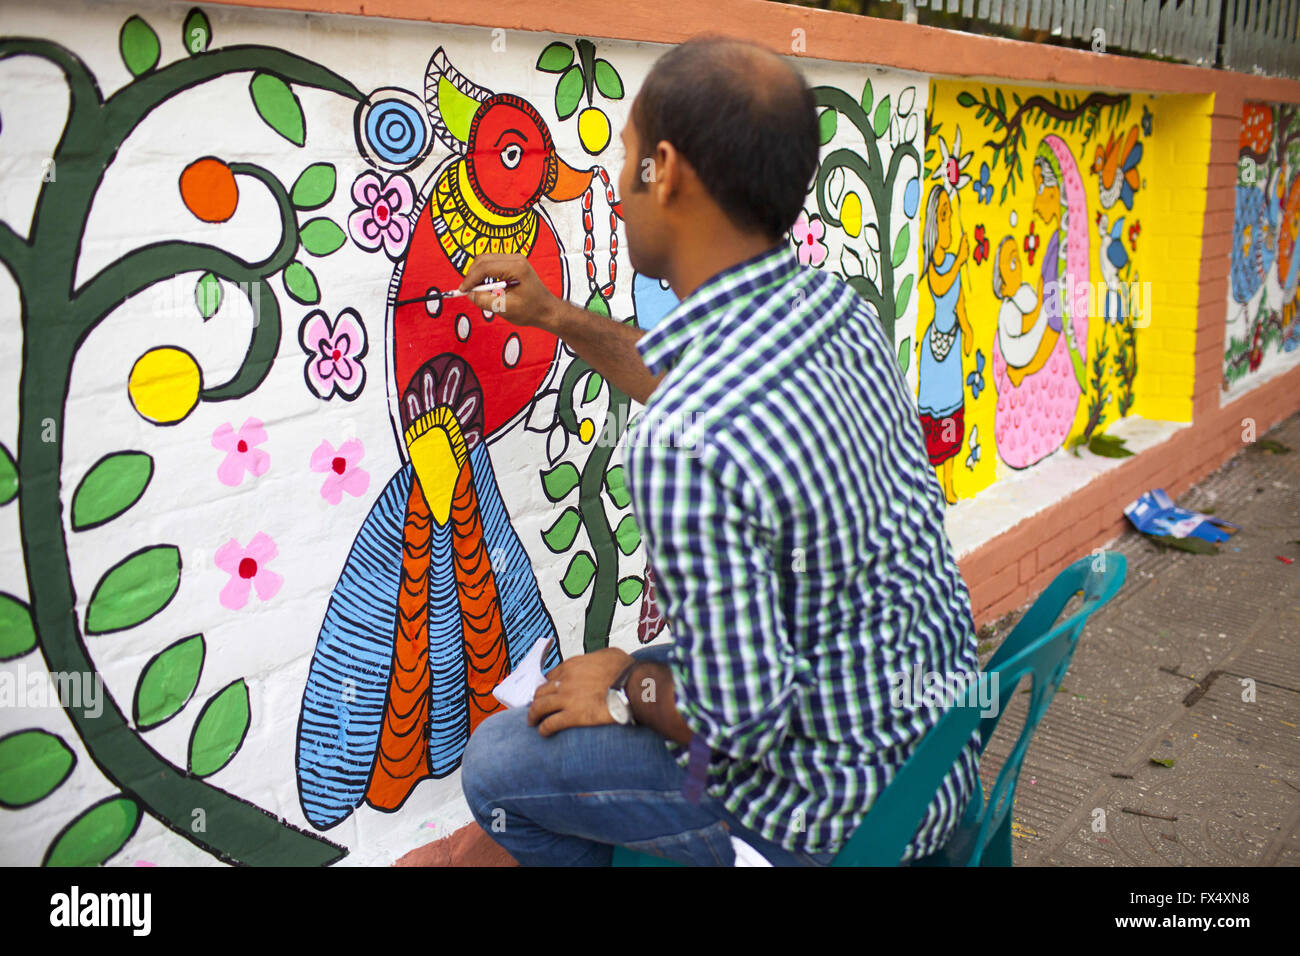 Dhaka, Dhaka, Bangladesh. 11th Apr, 2016. April 11, 2016 Dhaka, Bangladesh ''“ Dhaka University Art Institute student take colorful preparation to celebrate upcoming Bengali New Year 1423 in Dhaka. Pahela Baishakh (the first day of the Bangla month) can be followed back to its origins during the Mughal period when Emperor Akbar introduced the Bangla calendar to streamline tax collection while in the course of time it became part of Bengali culture and tradition. © K M Asad/ZUMA Wire/Alamy Live News Stock Photo